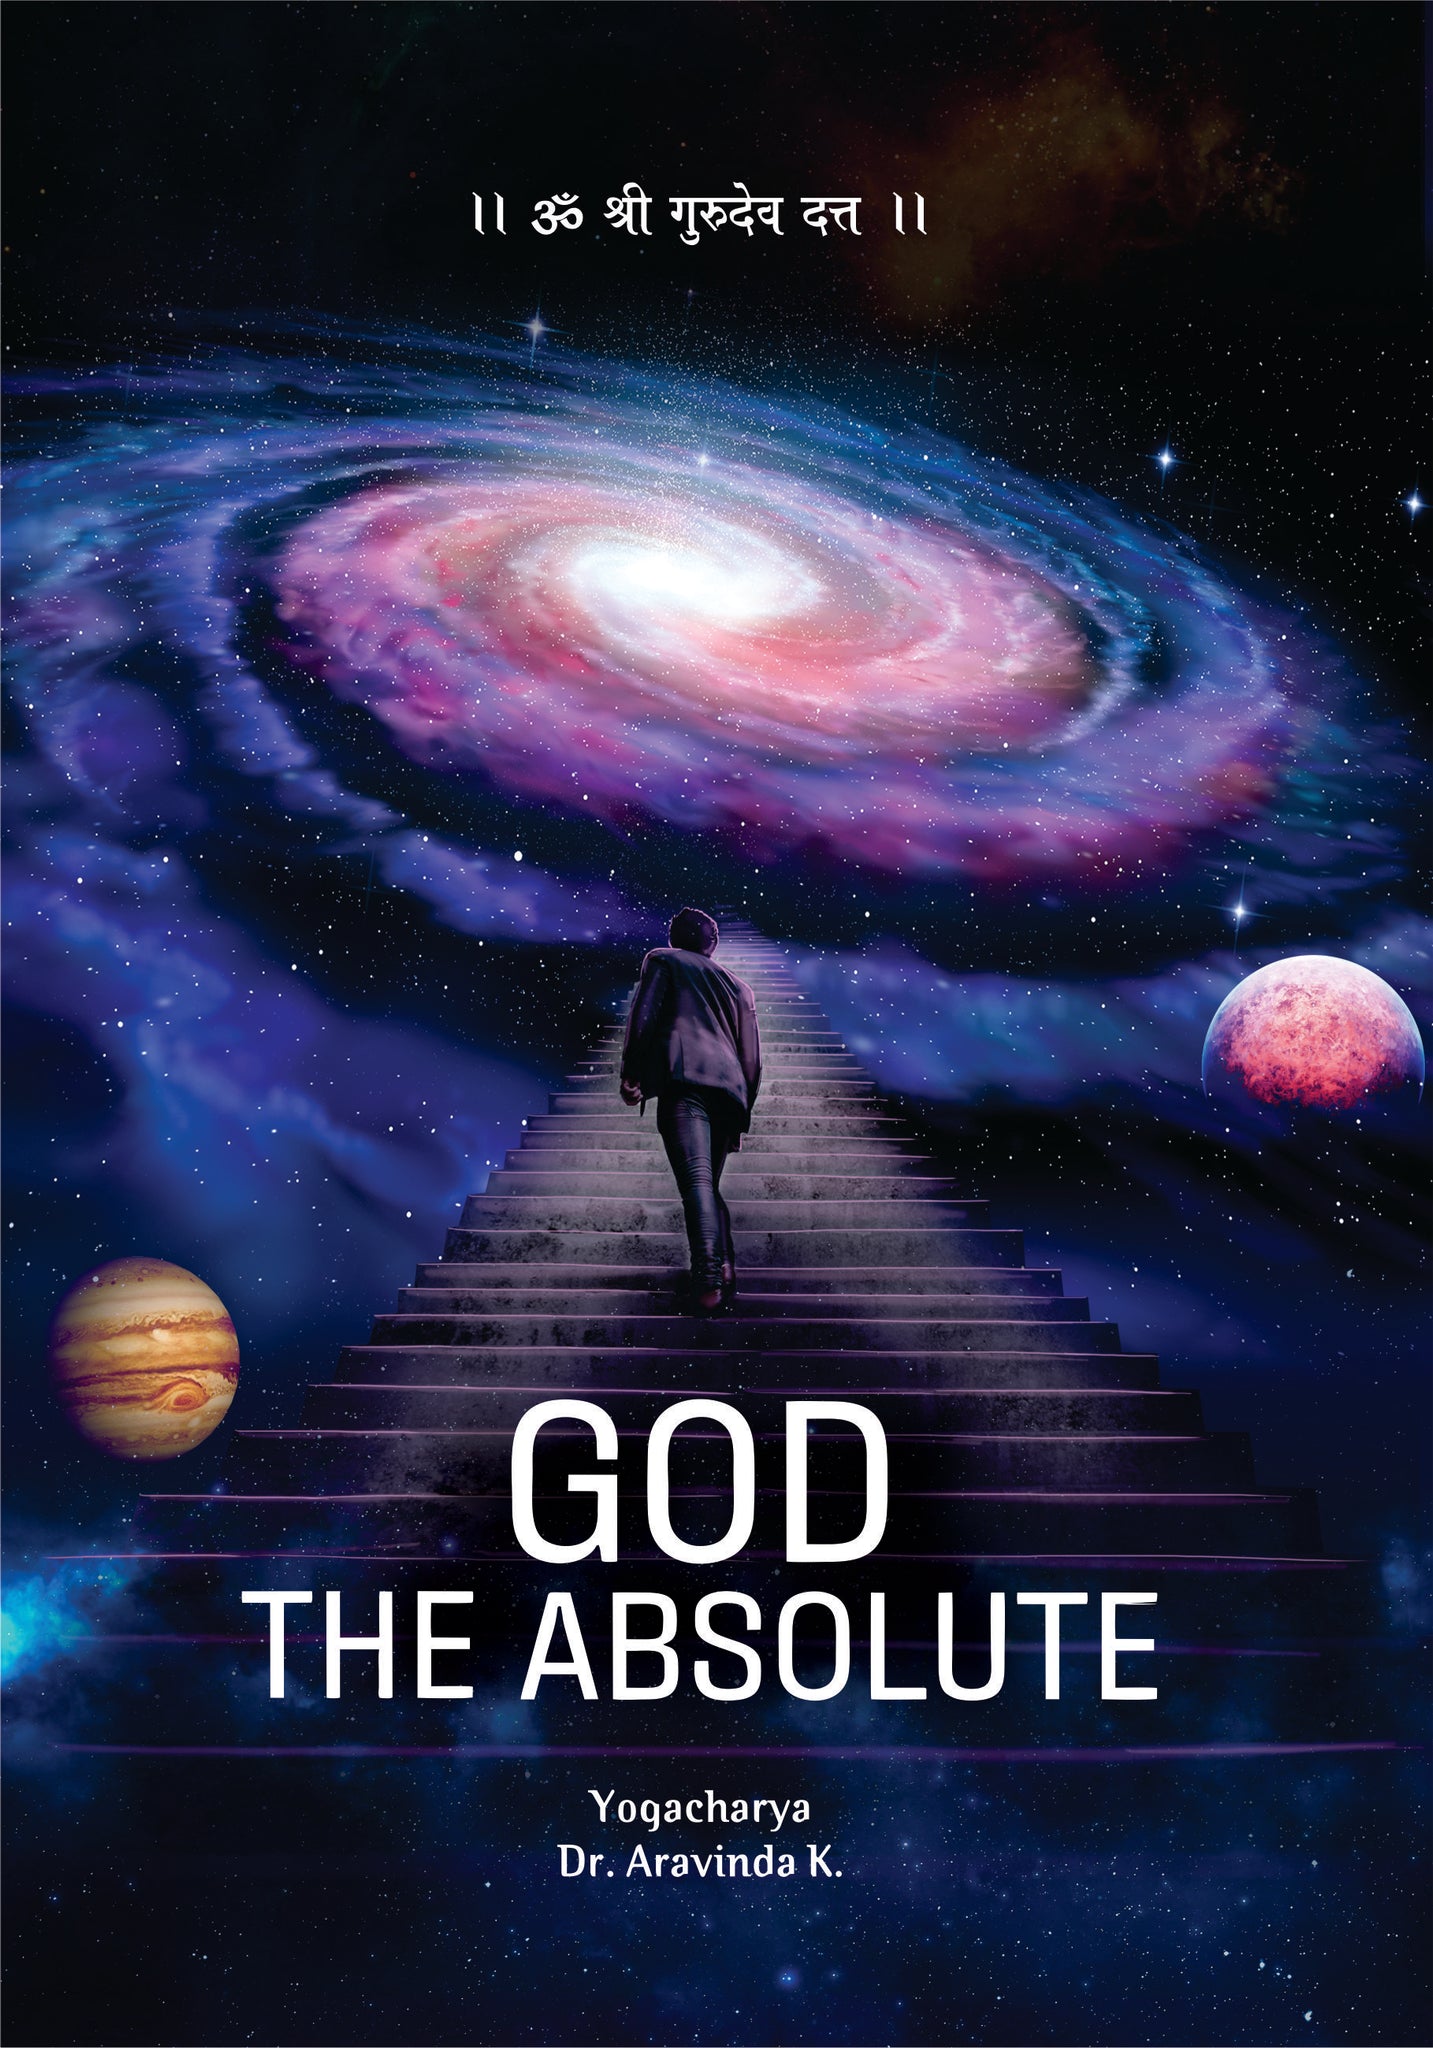 GOD THE ABSOLUTE